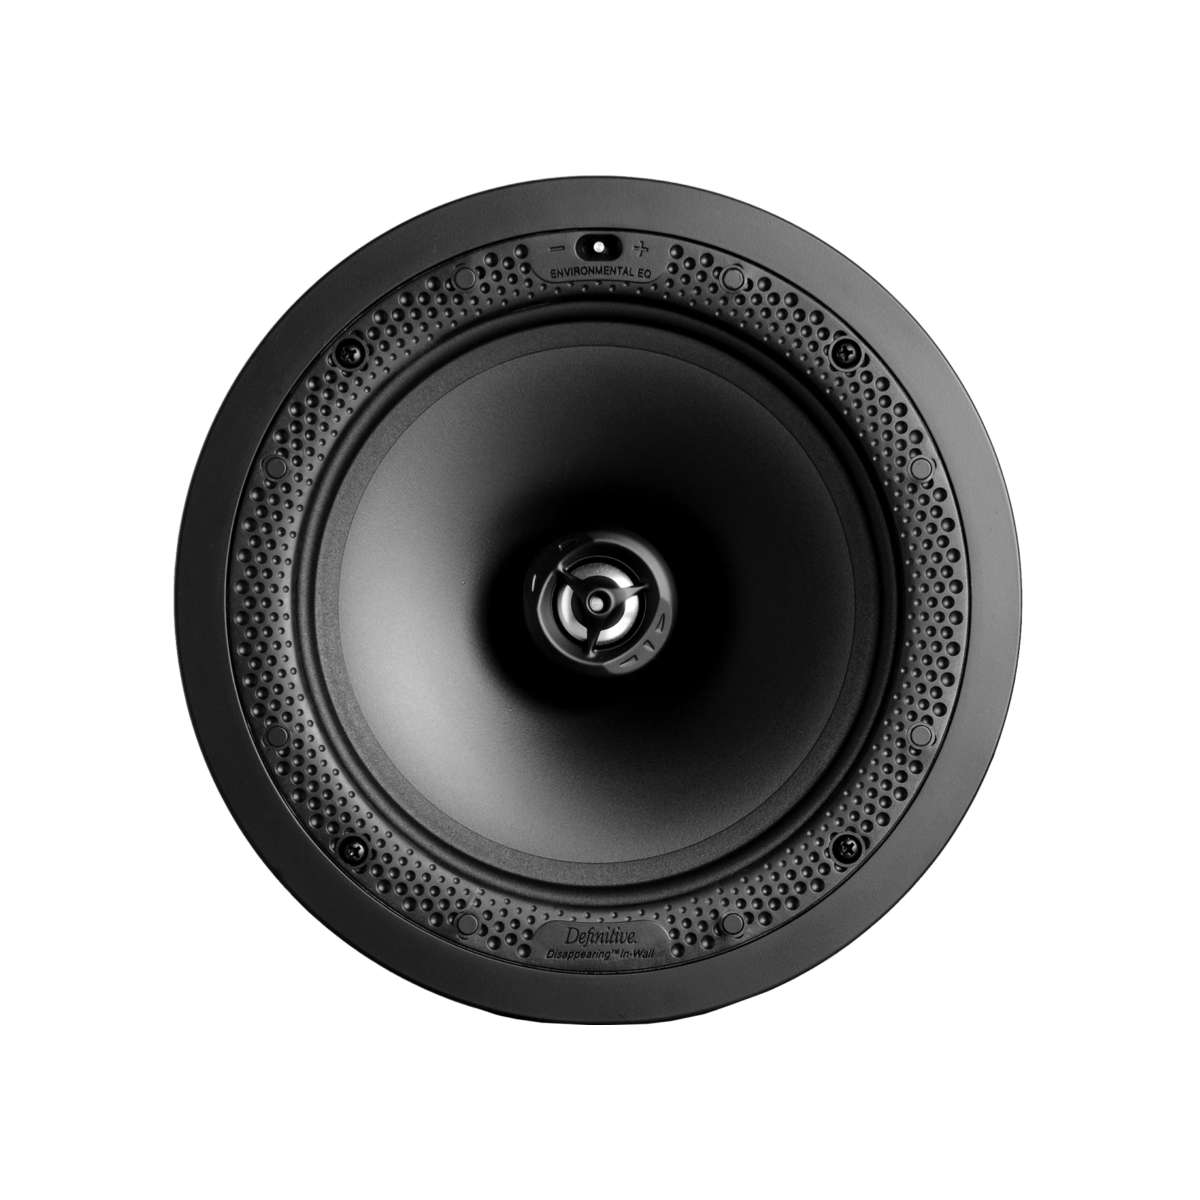 Definitive Technology DI 8R Disappearing™ Round In-Wall / In-Ceiling Speaker - Ooberpad